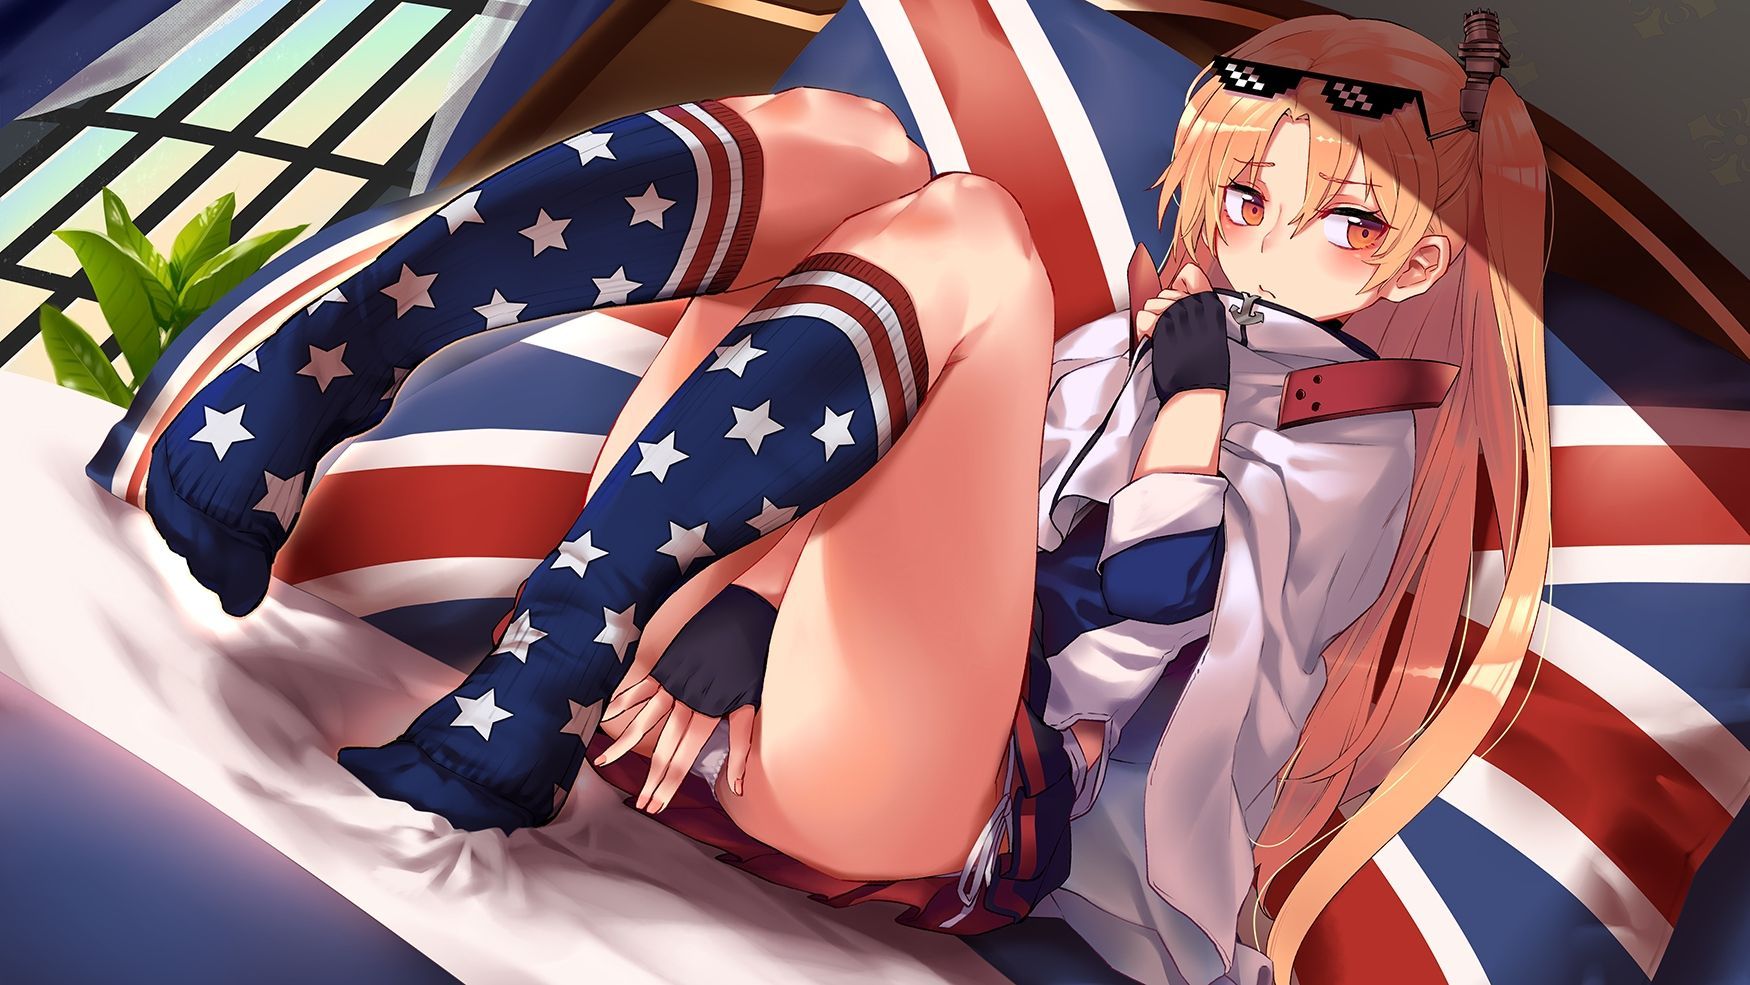 【Azur Lane】I will put cleveland's ero cute images together for free ☆ 21